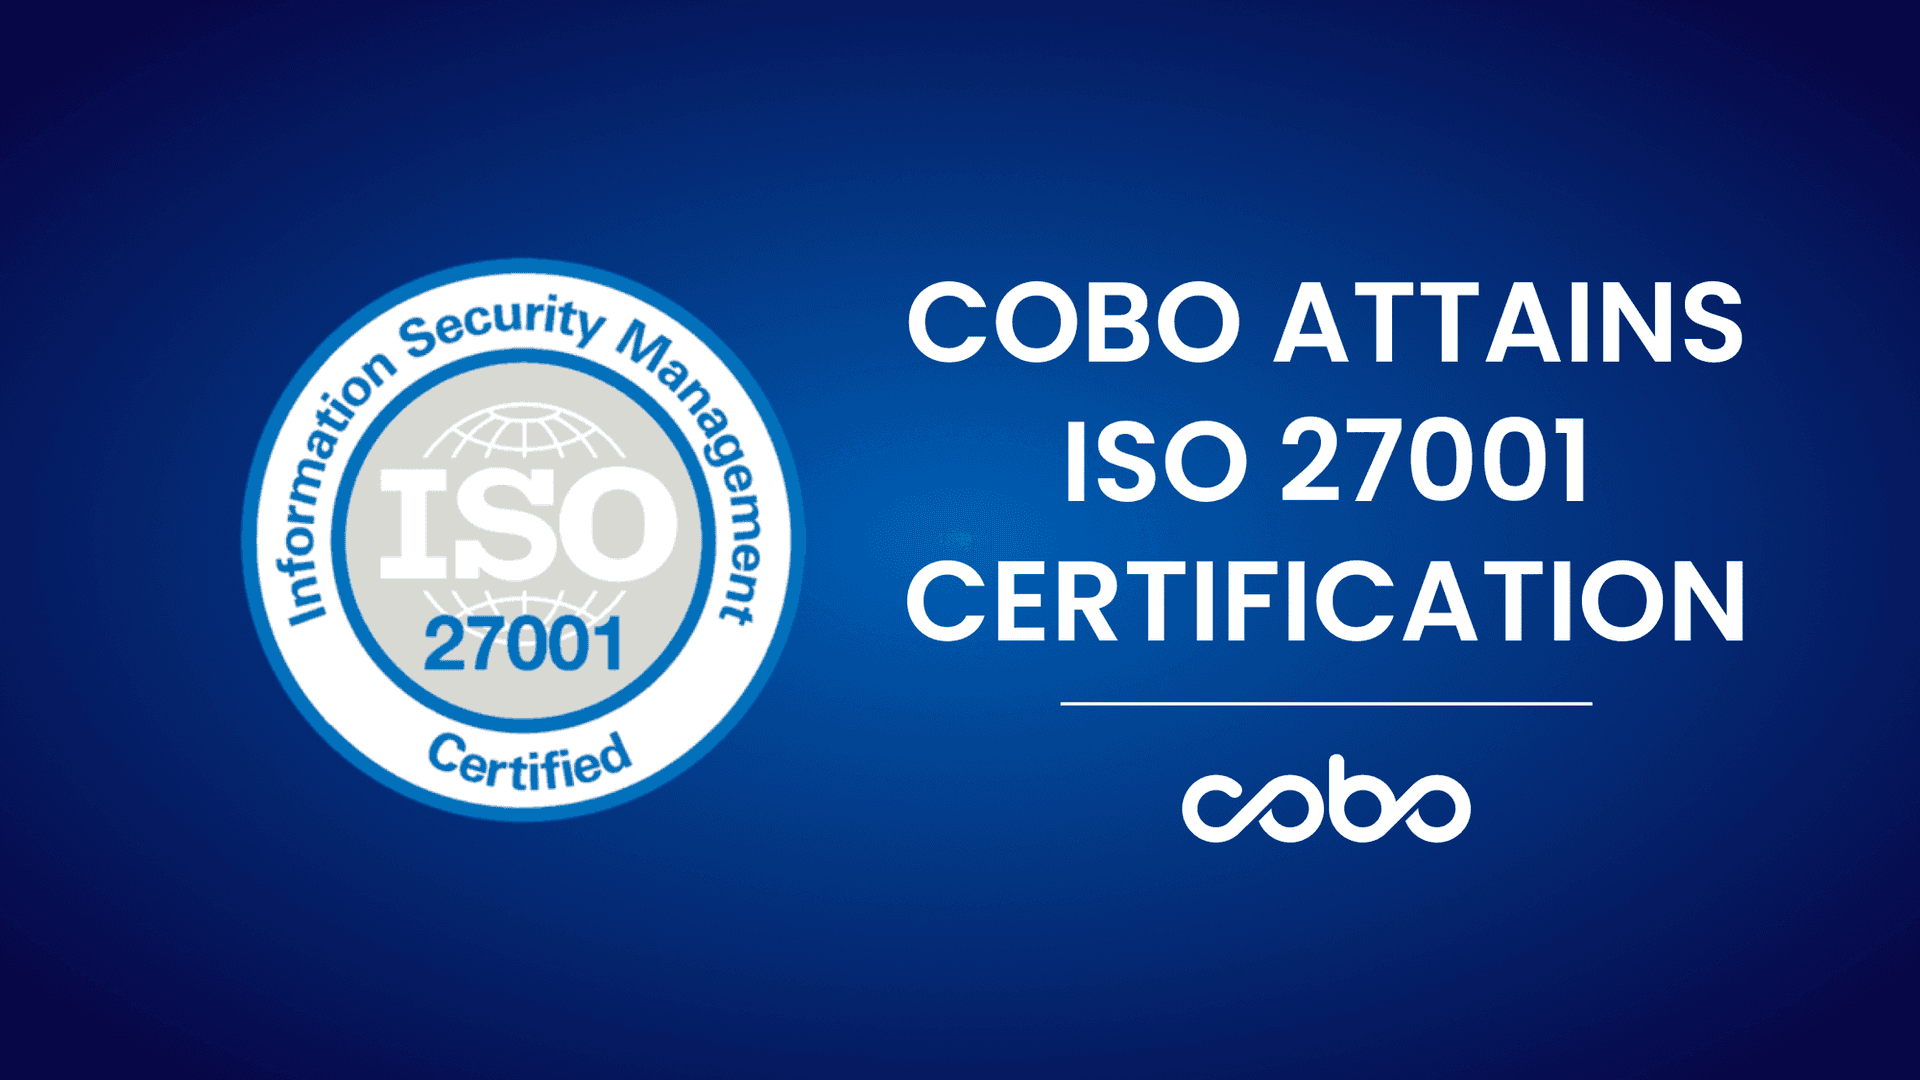 Cobo Achieves ISO 27001 Certification, Showcasing Strengthened Information Security in Institutional Custody